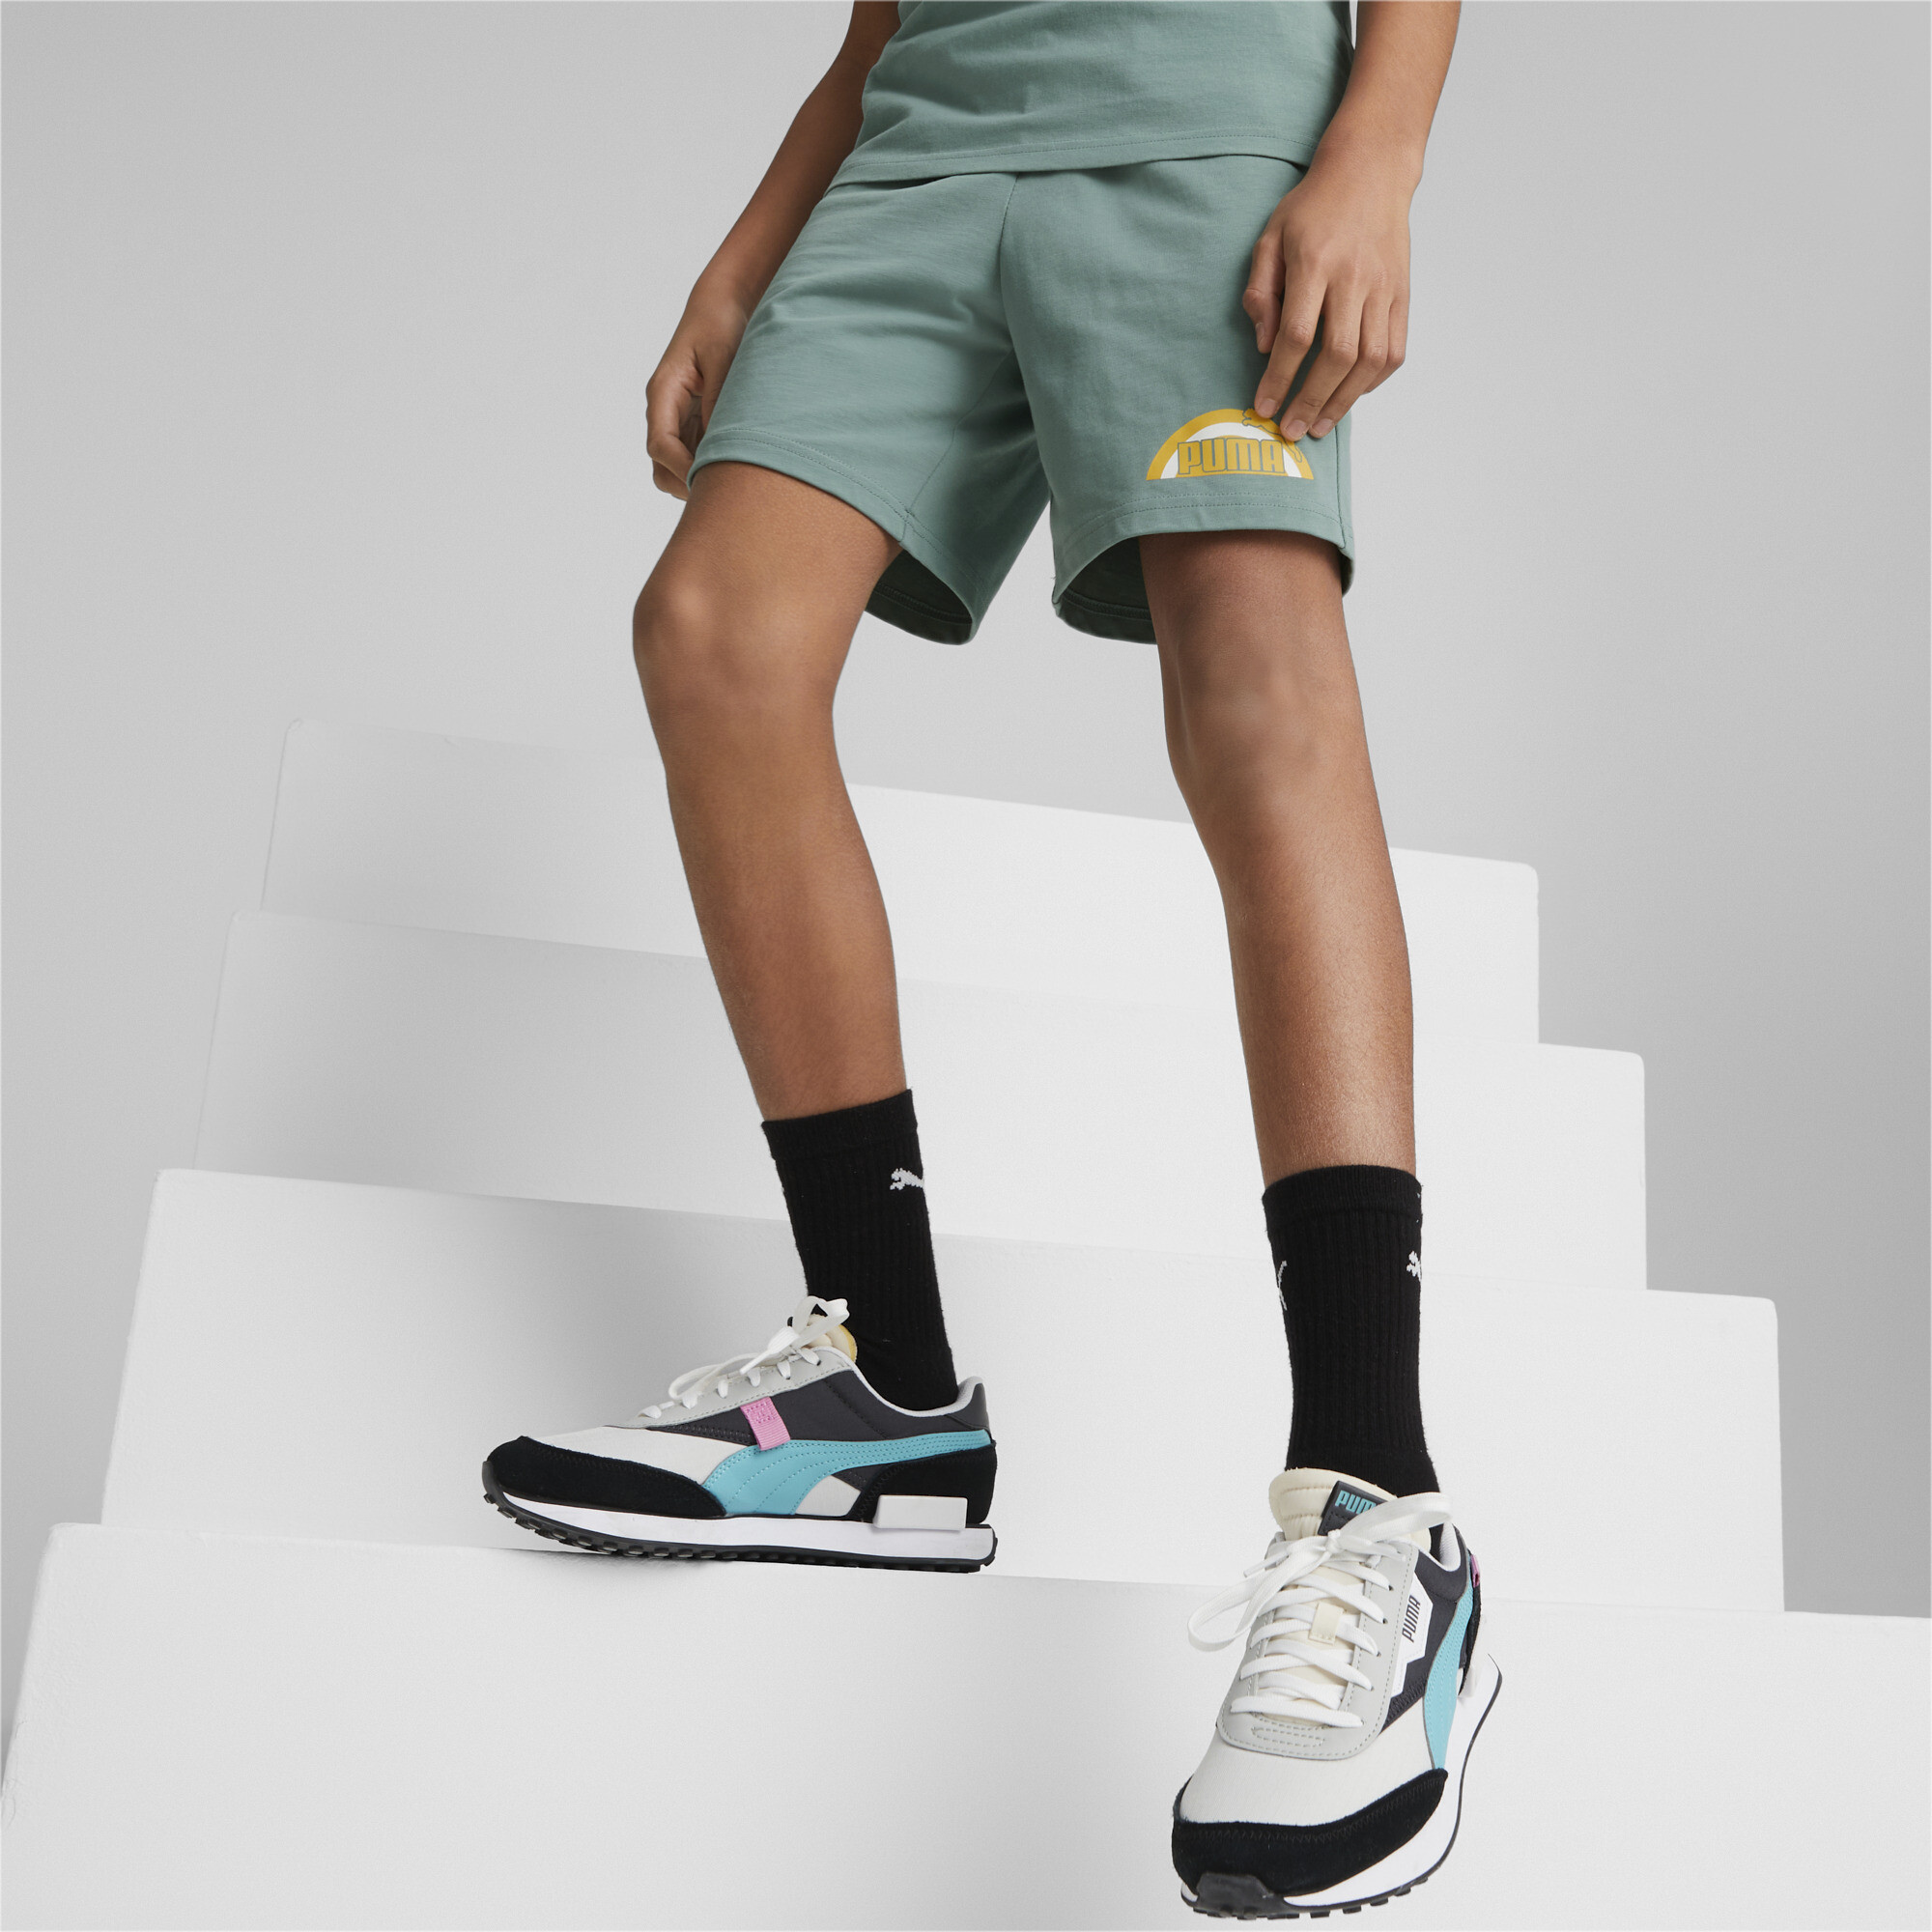 PUMA Essentials+ Street Art Shorts In Gray, Size 5-6 Youth